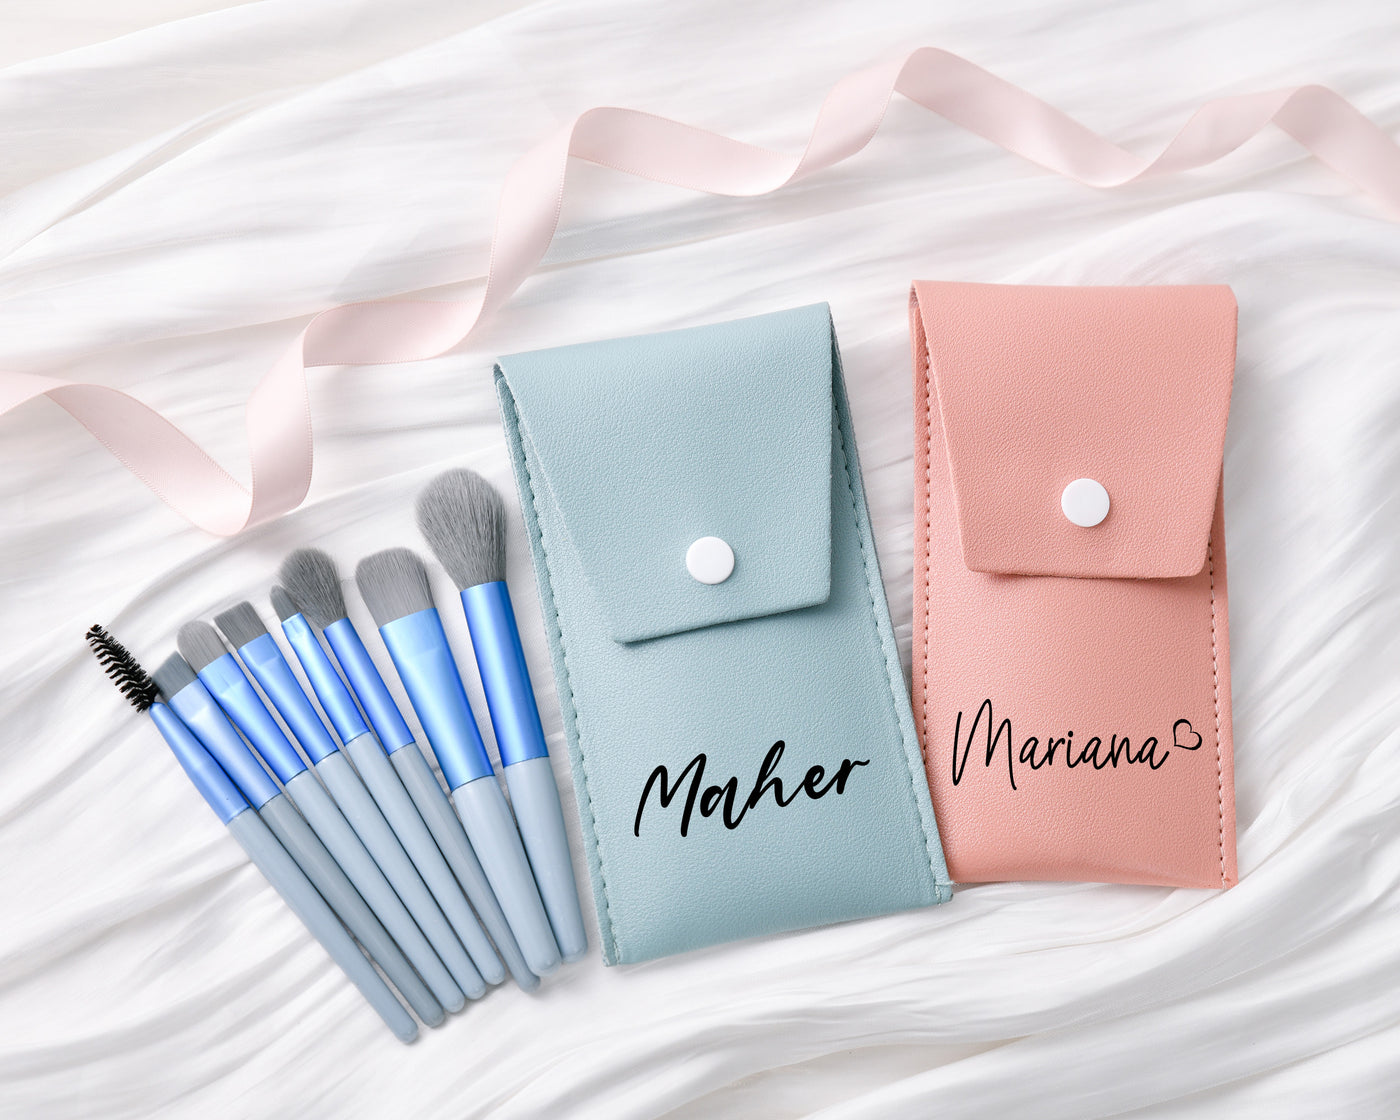 Custom Makeup Brush Set, Gift for Woman, Bridesmaid Gifts, Birthday Gifts, Valentine's Day Gifts For Her, Bridesmaid Makeup Brush